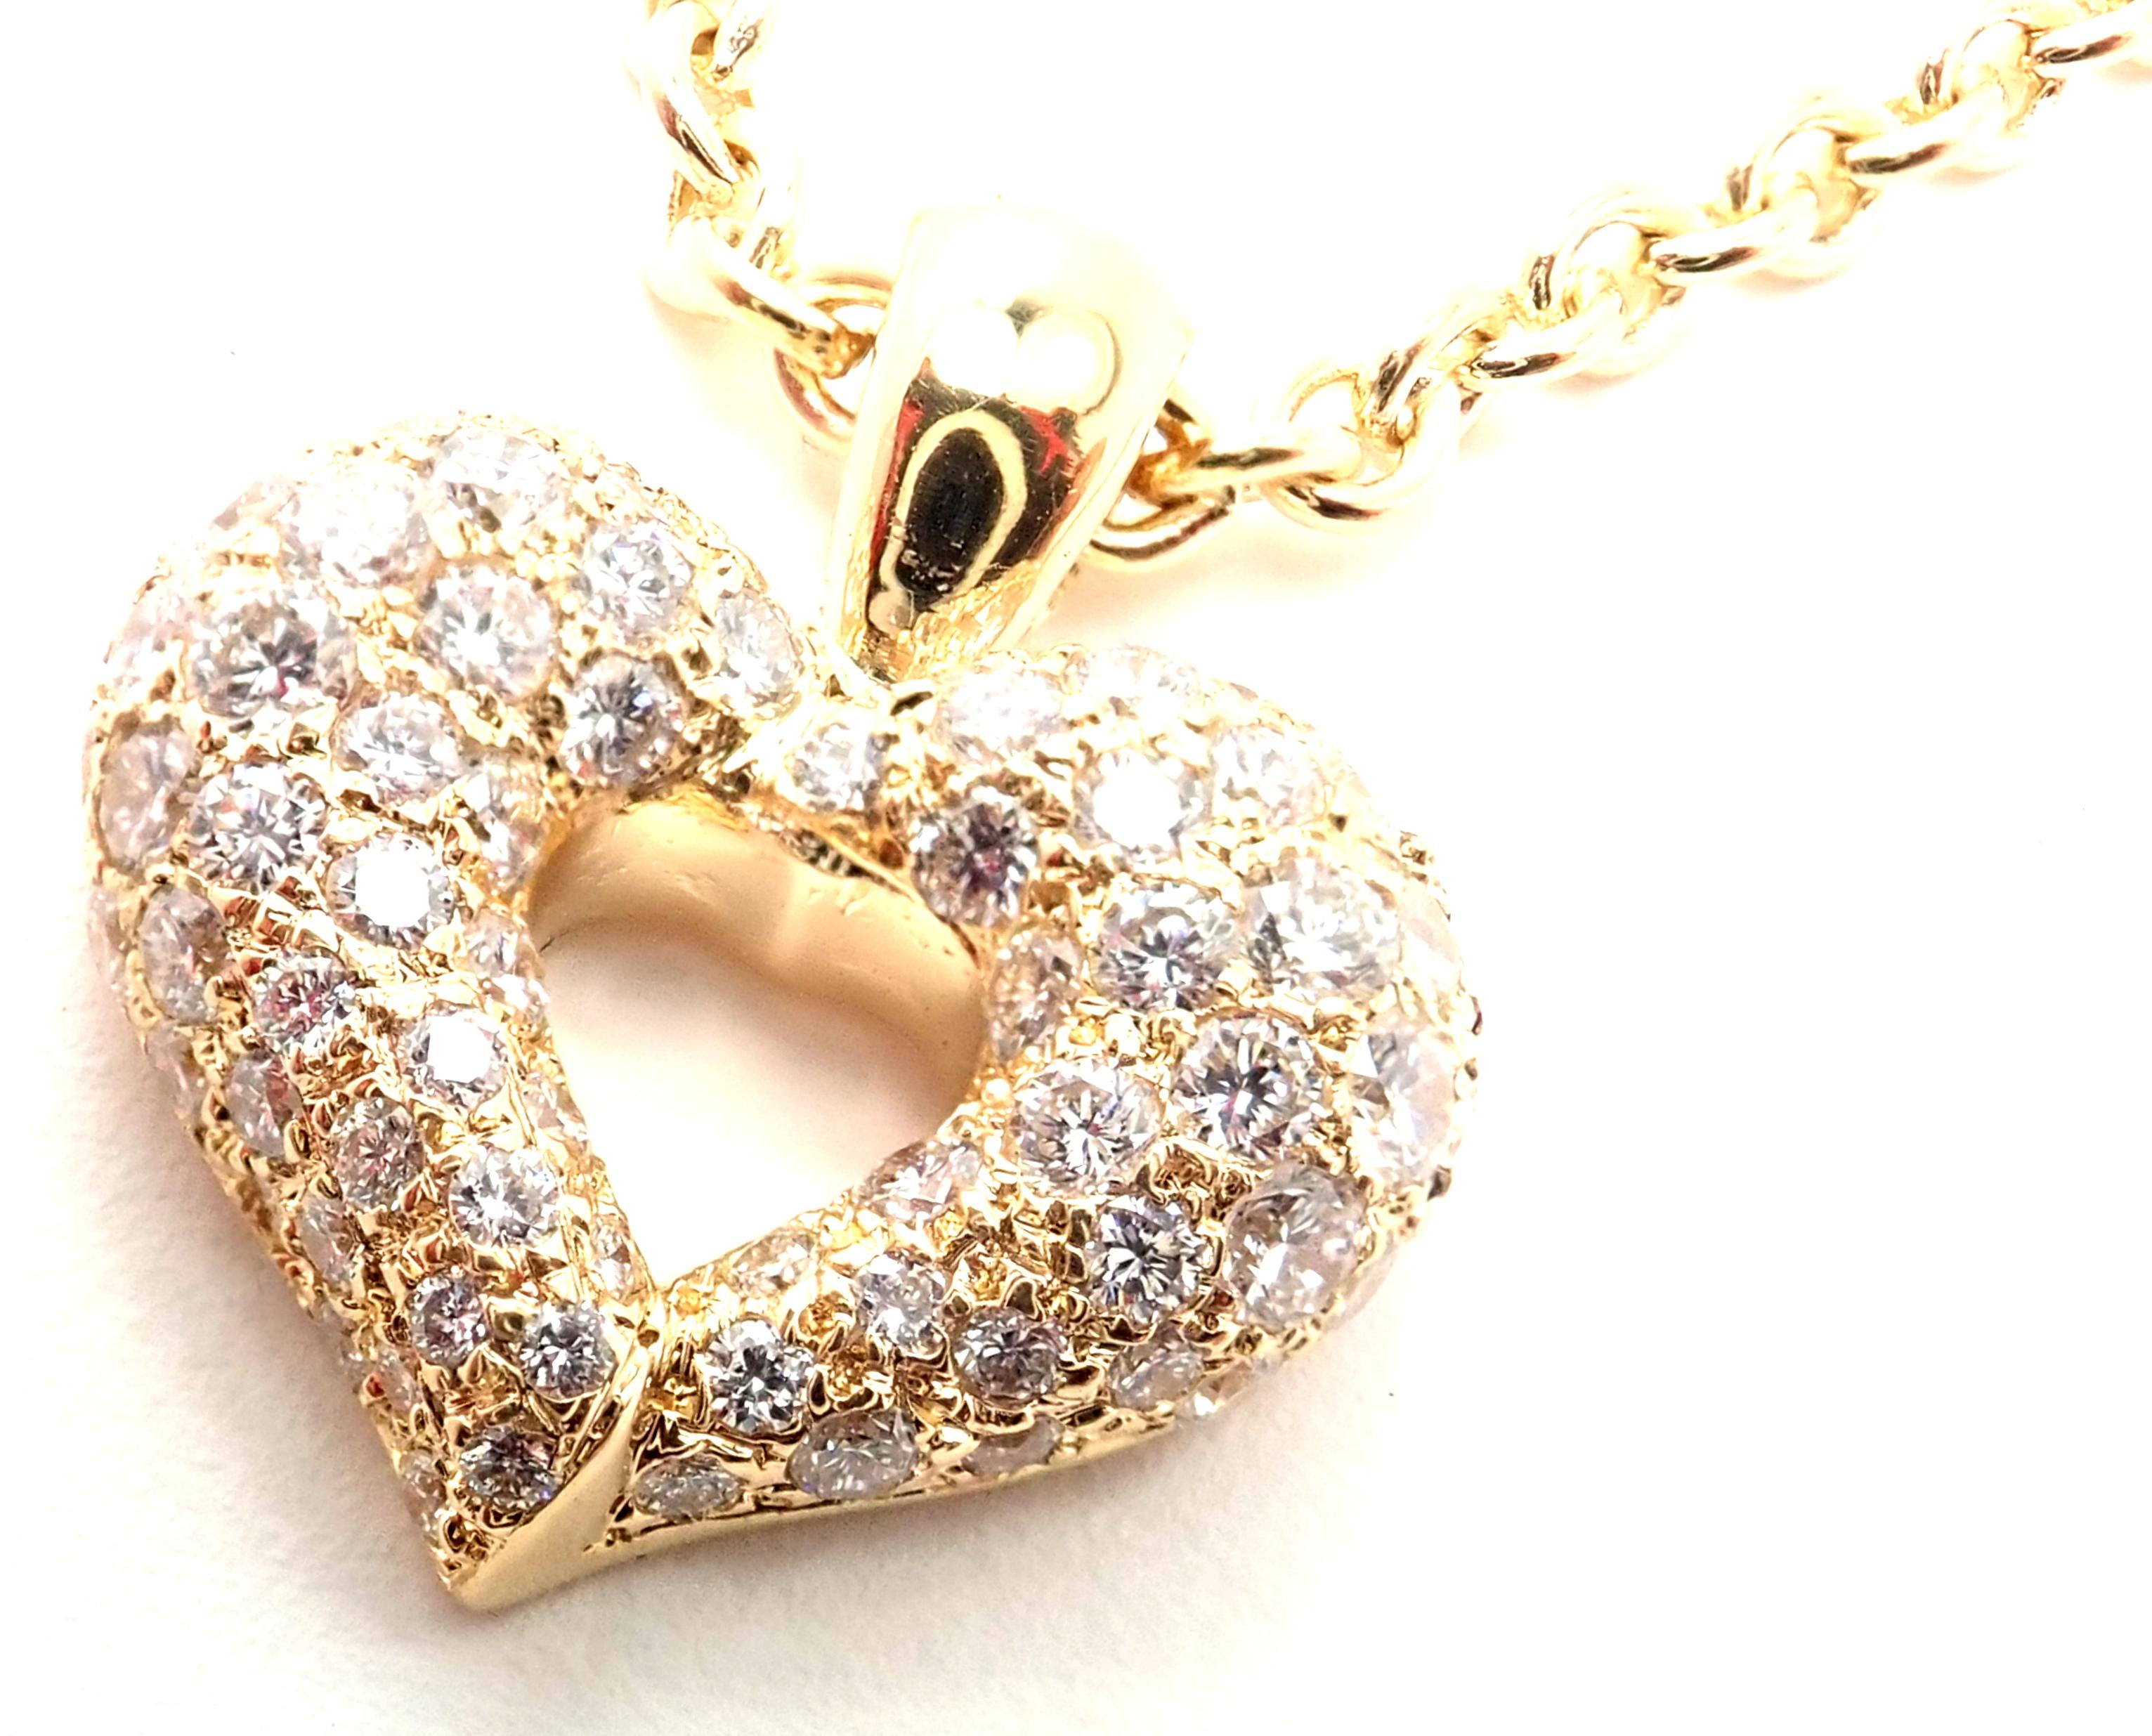 18k Yellow Gold Diamond Heart Pendant Necklace by Van Cleef & Arpels.
With 80 round brilliant cut diamonds VVS1 clarity, G color total weight 2ct 
This necklace comes with service paper from a VCA store.​
Details:
Length: 16''
Pendant: 19mm